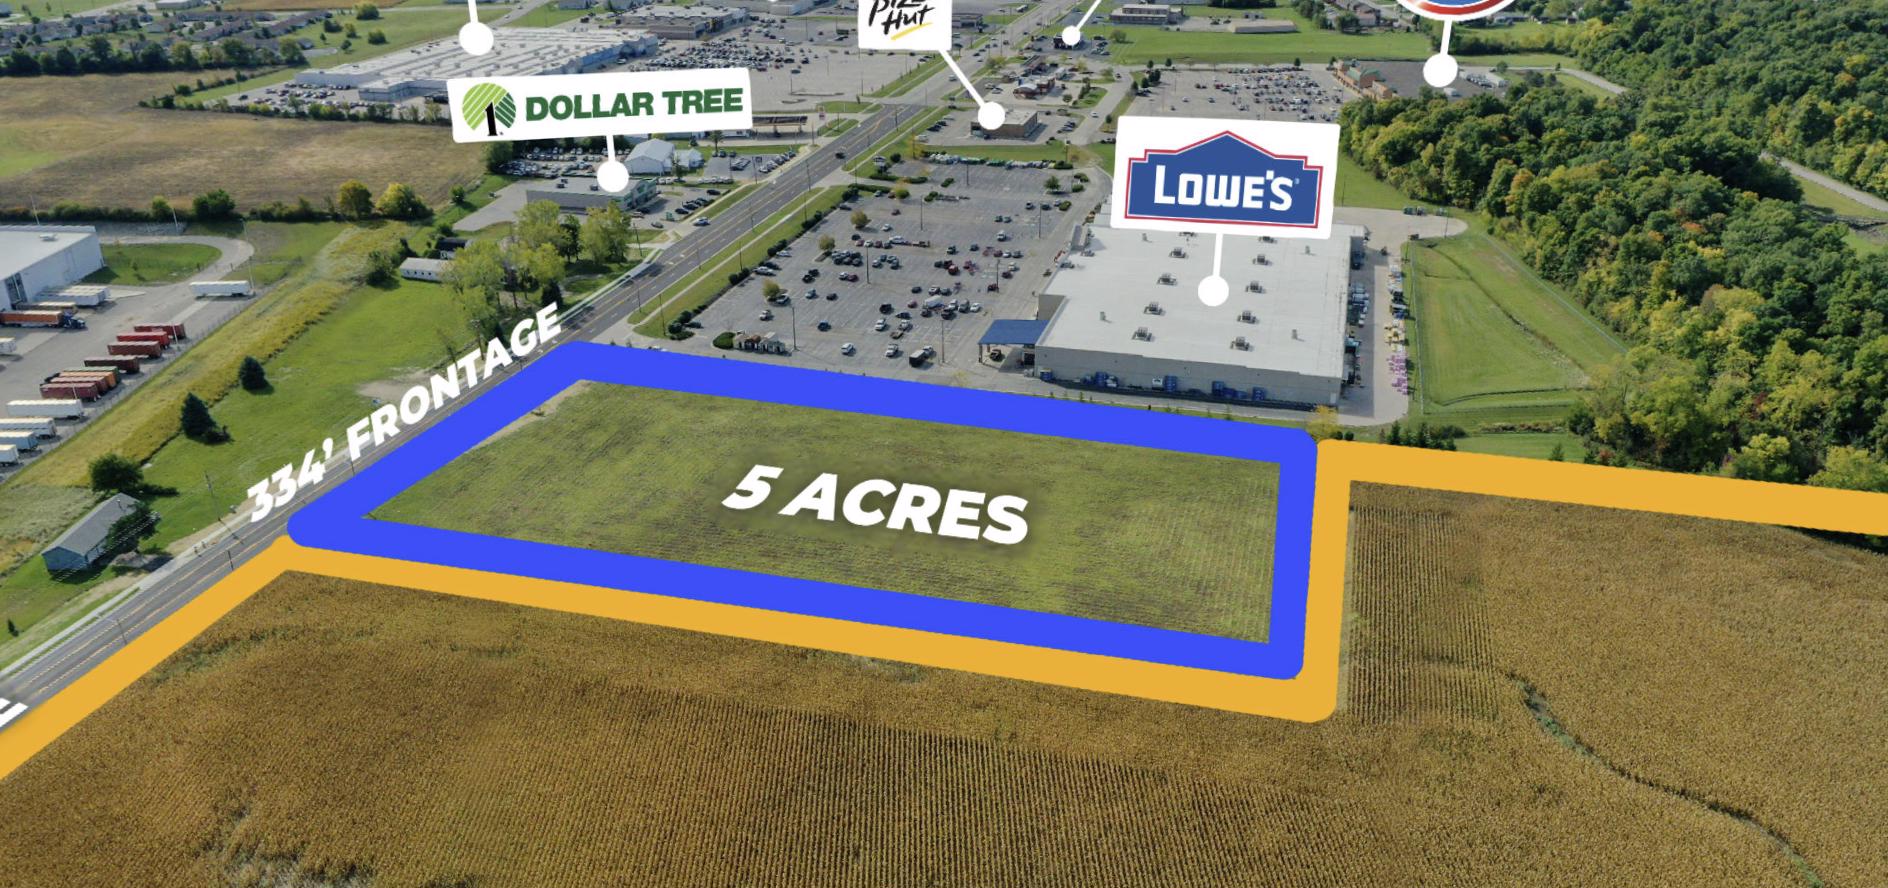 5 Acre Greenville Oh Development, Landscaping Greenville Ohio